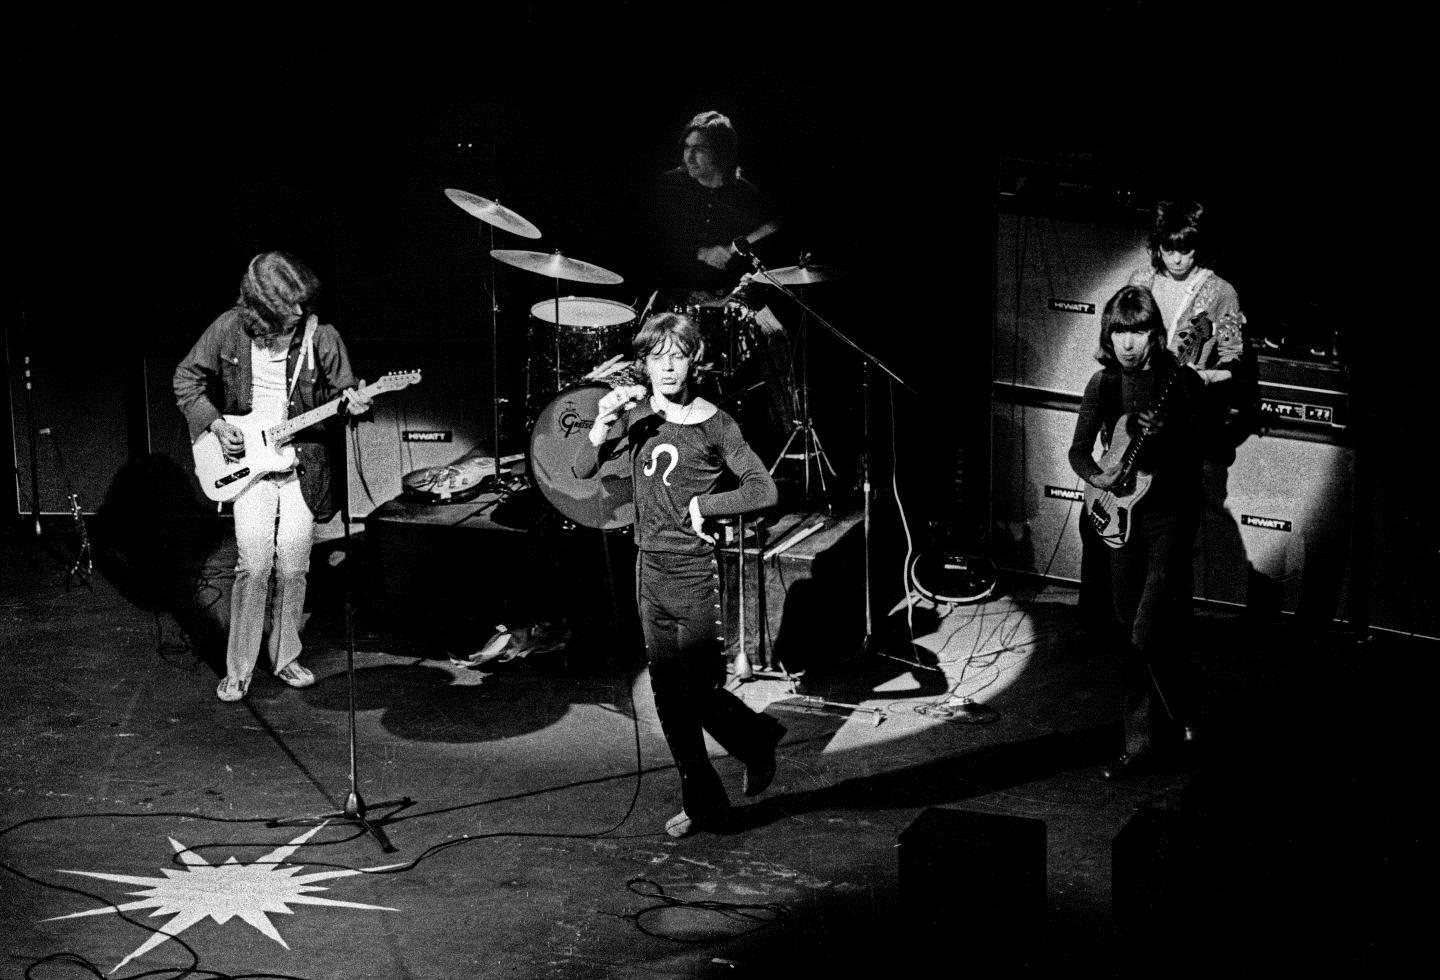 Barrie Wentzell Black and White Photograph - The Rolling Stones, Saville Theater, London, 1970